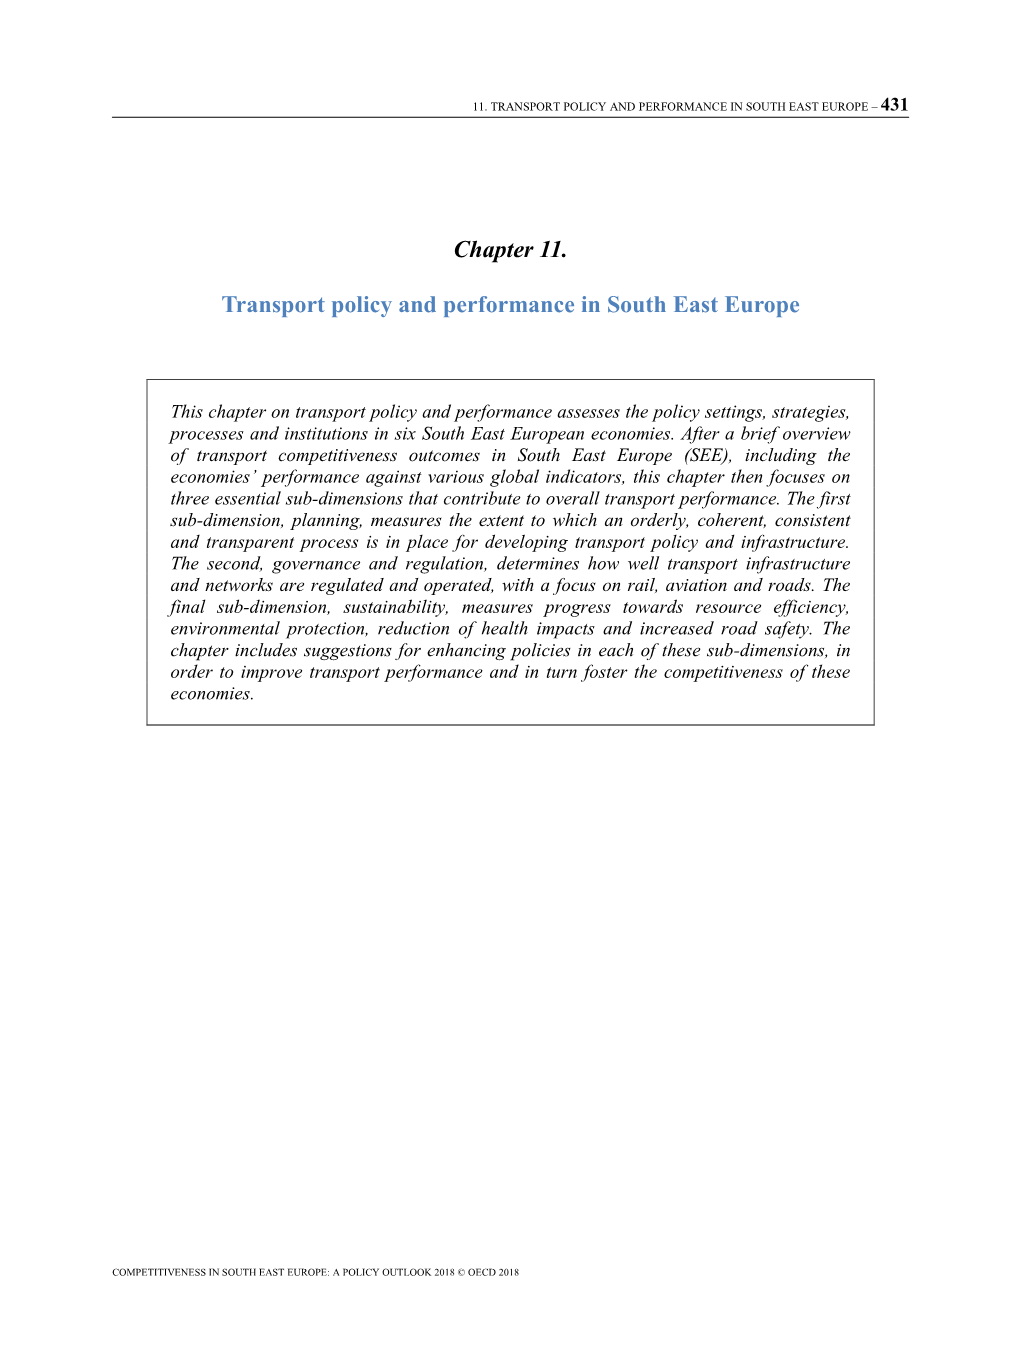 Chapter 11. Transport Policy and Performance in South East Europe